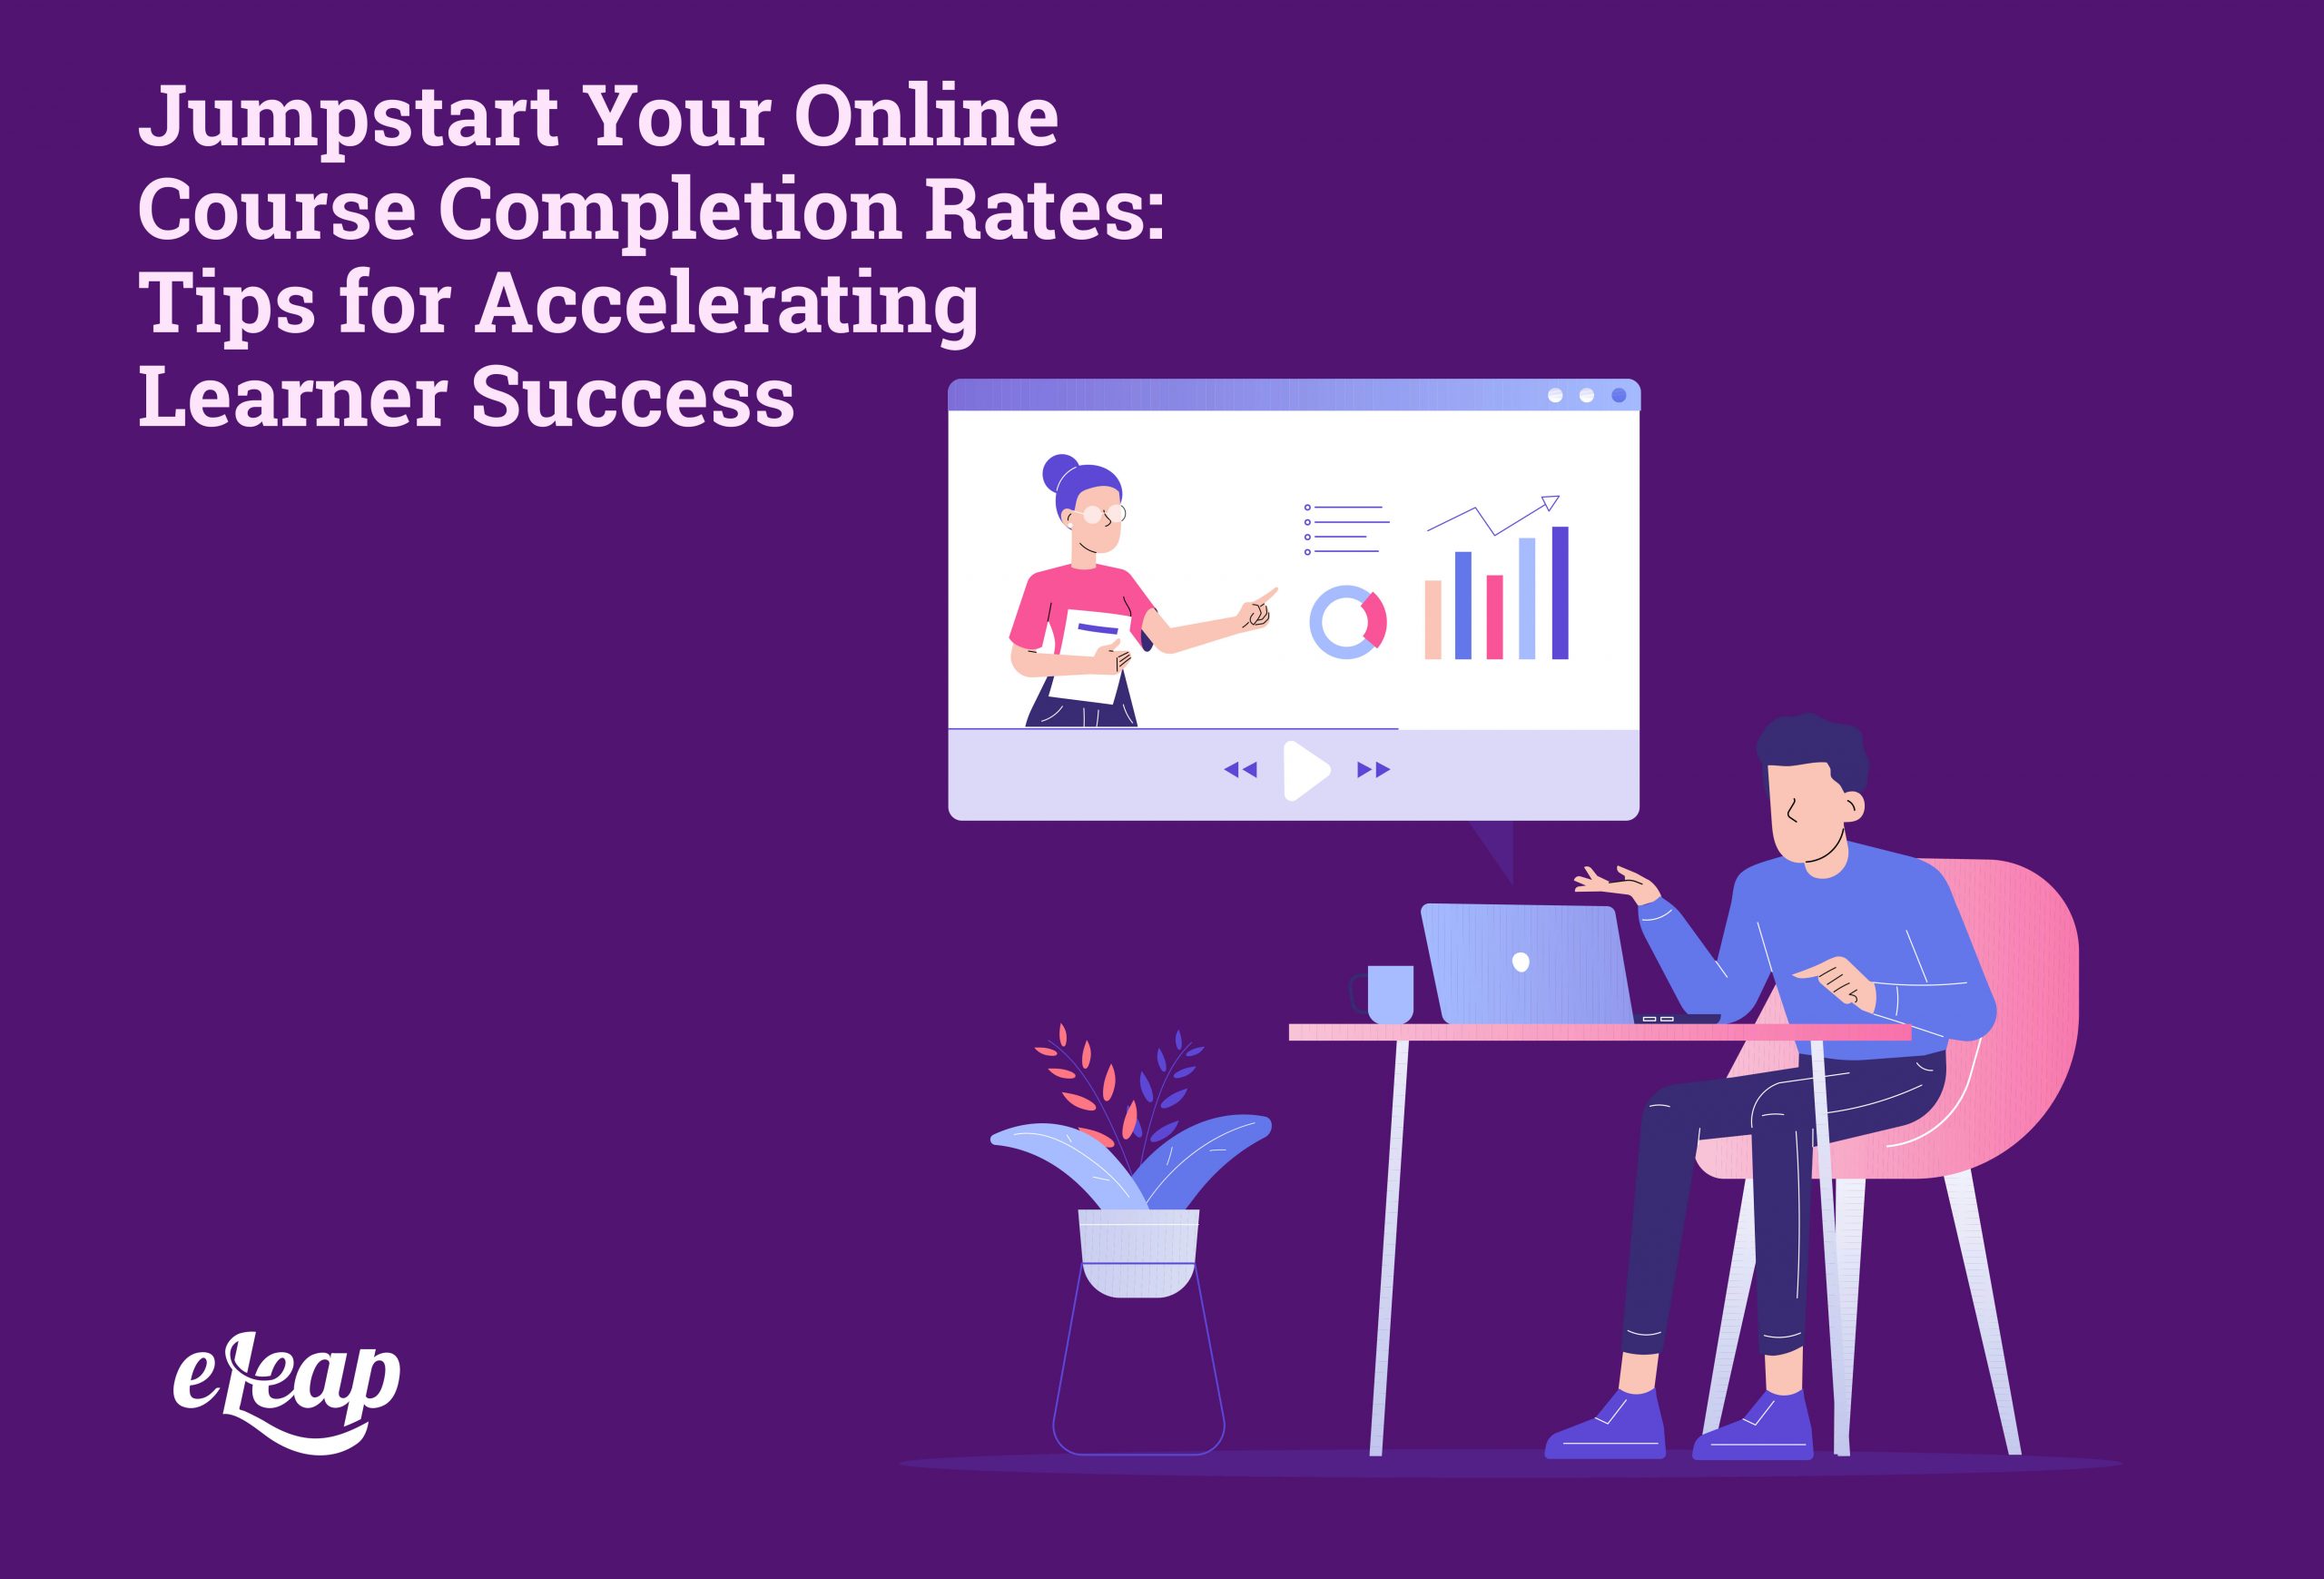 Jumpstart Your Online Course Completion Rates: Tips for Accelerating Learner Success